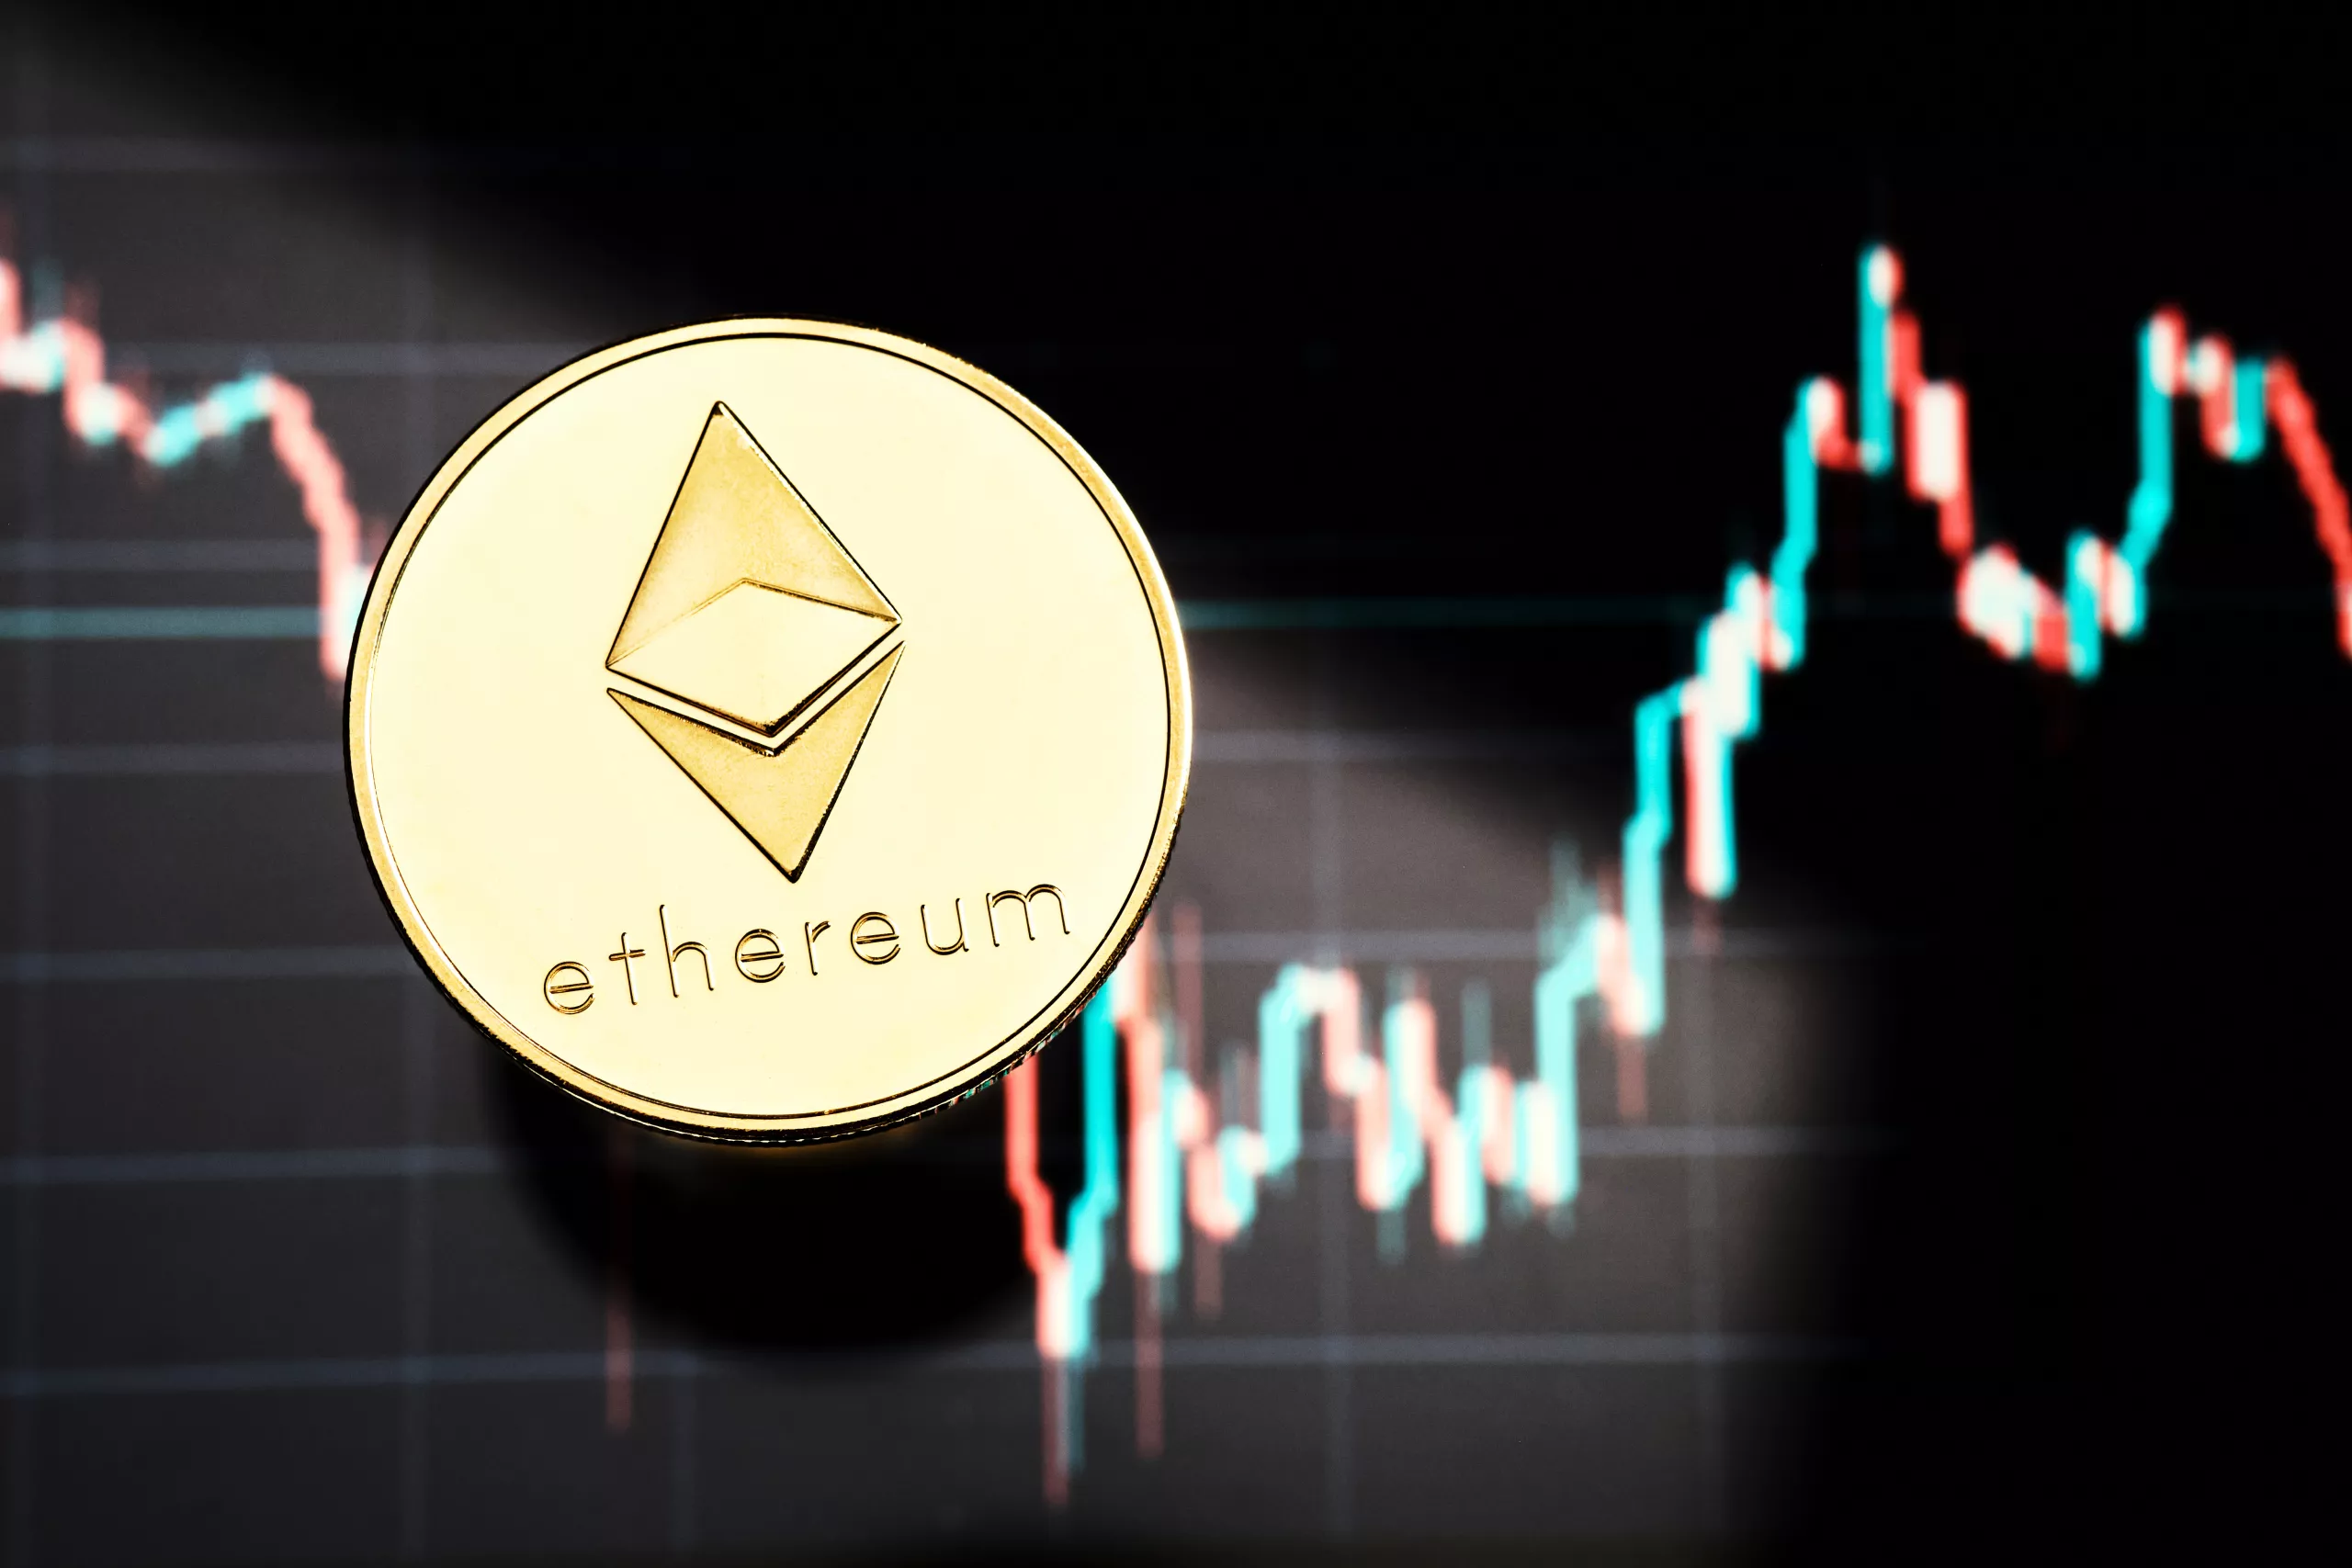 Ethereum cryptocurrency and chart